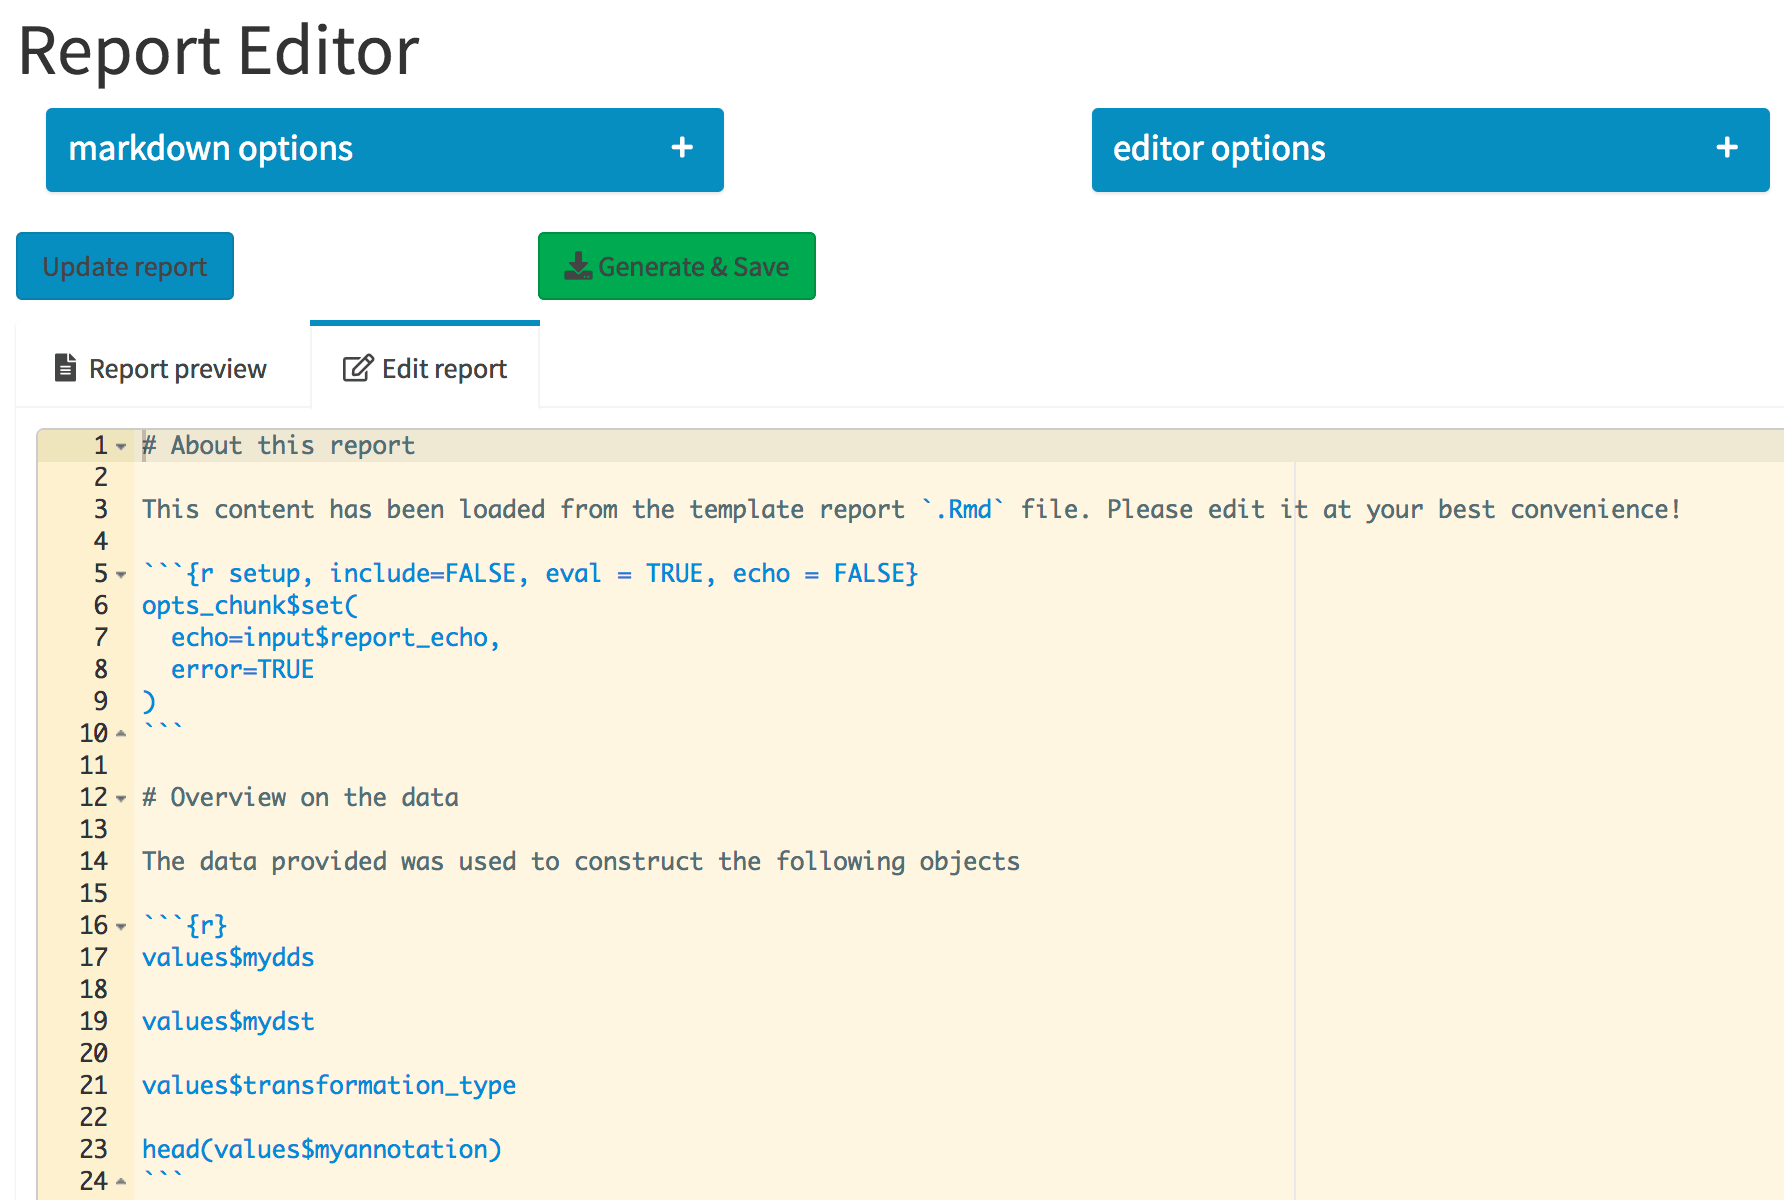 The Report Editor tab. The collapsible elements control general markdown and editor options, which are regarded when the report is compiled. Its content is specified in the Ace editor, integrated in the Shiny app.